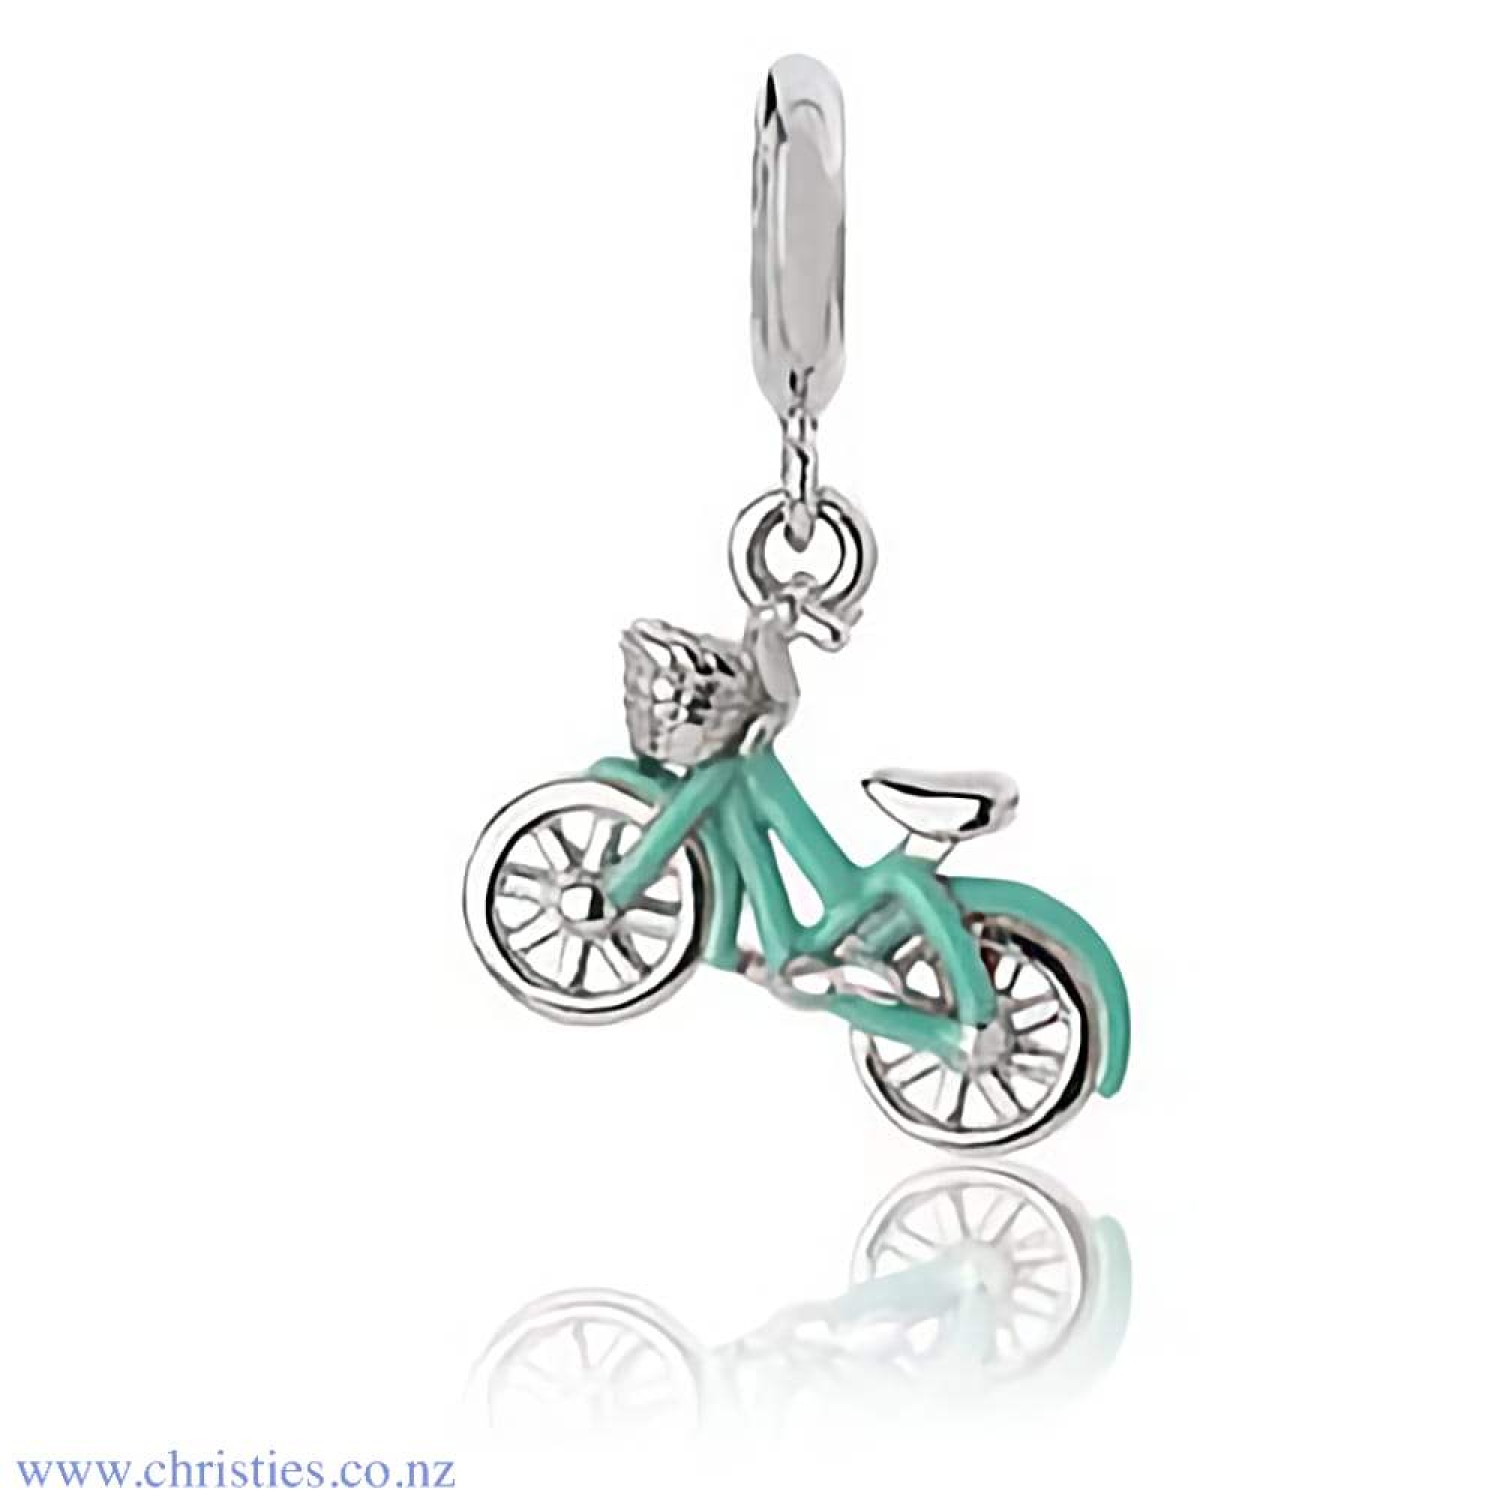 LKD046 Evolve Jewellery Cruiser Bike  Charm. Along the coastal roads or picturesque wine trails, a relaxing bike ride is a relaxing summer activity. Representing the freedom we feel atop two wheels, our stunning Cruiser Bike charm celebrates your memories